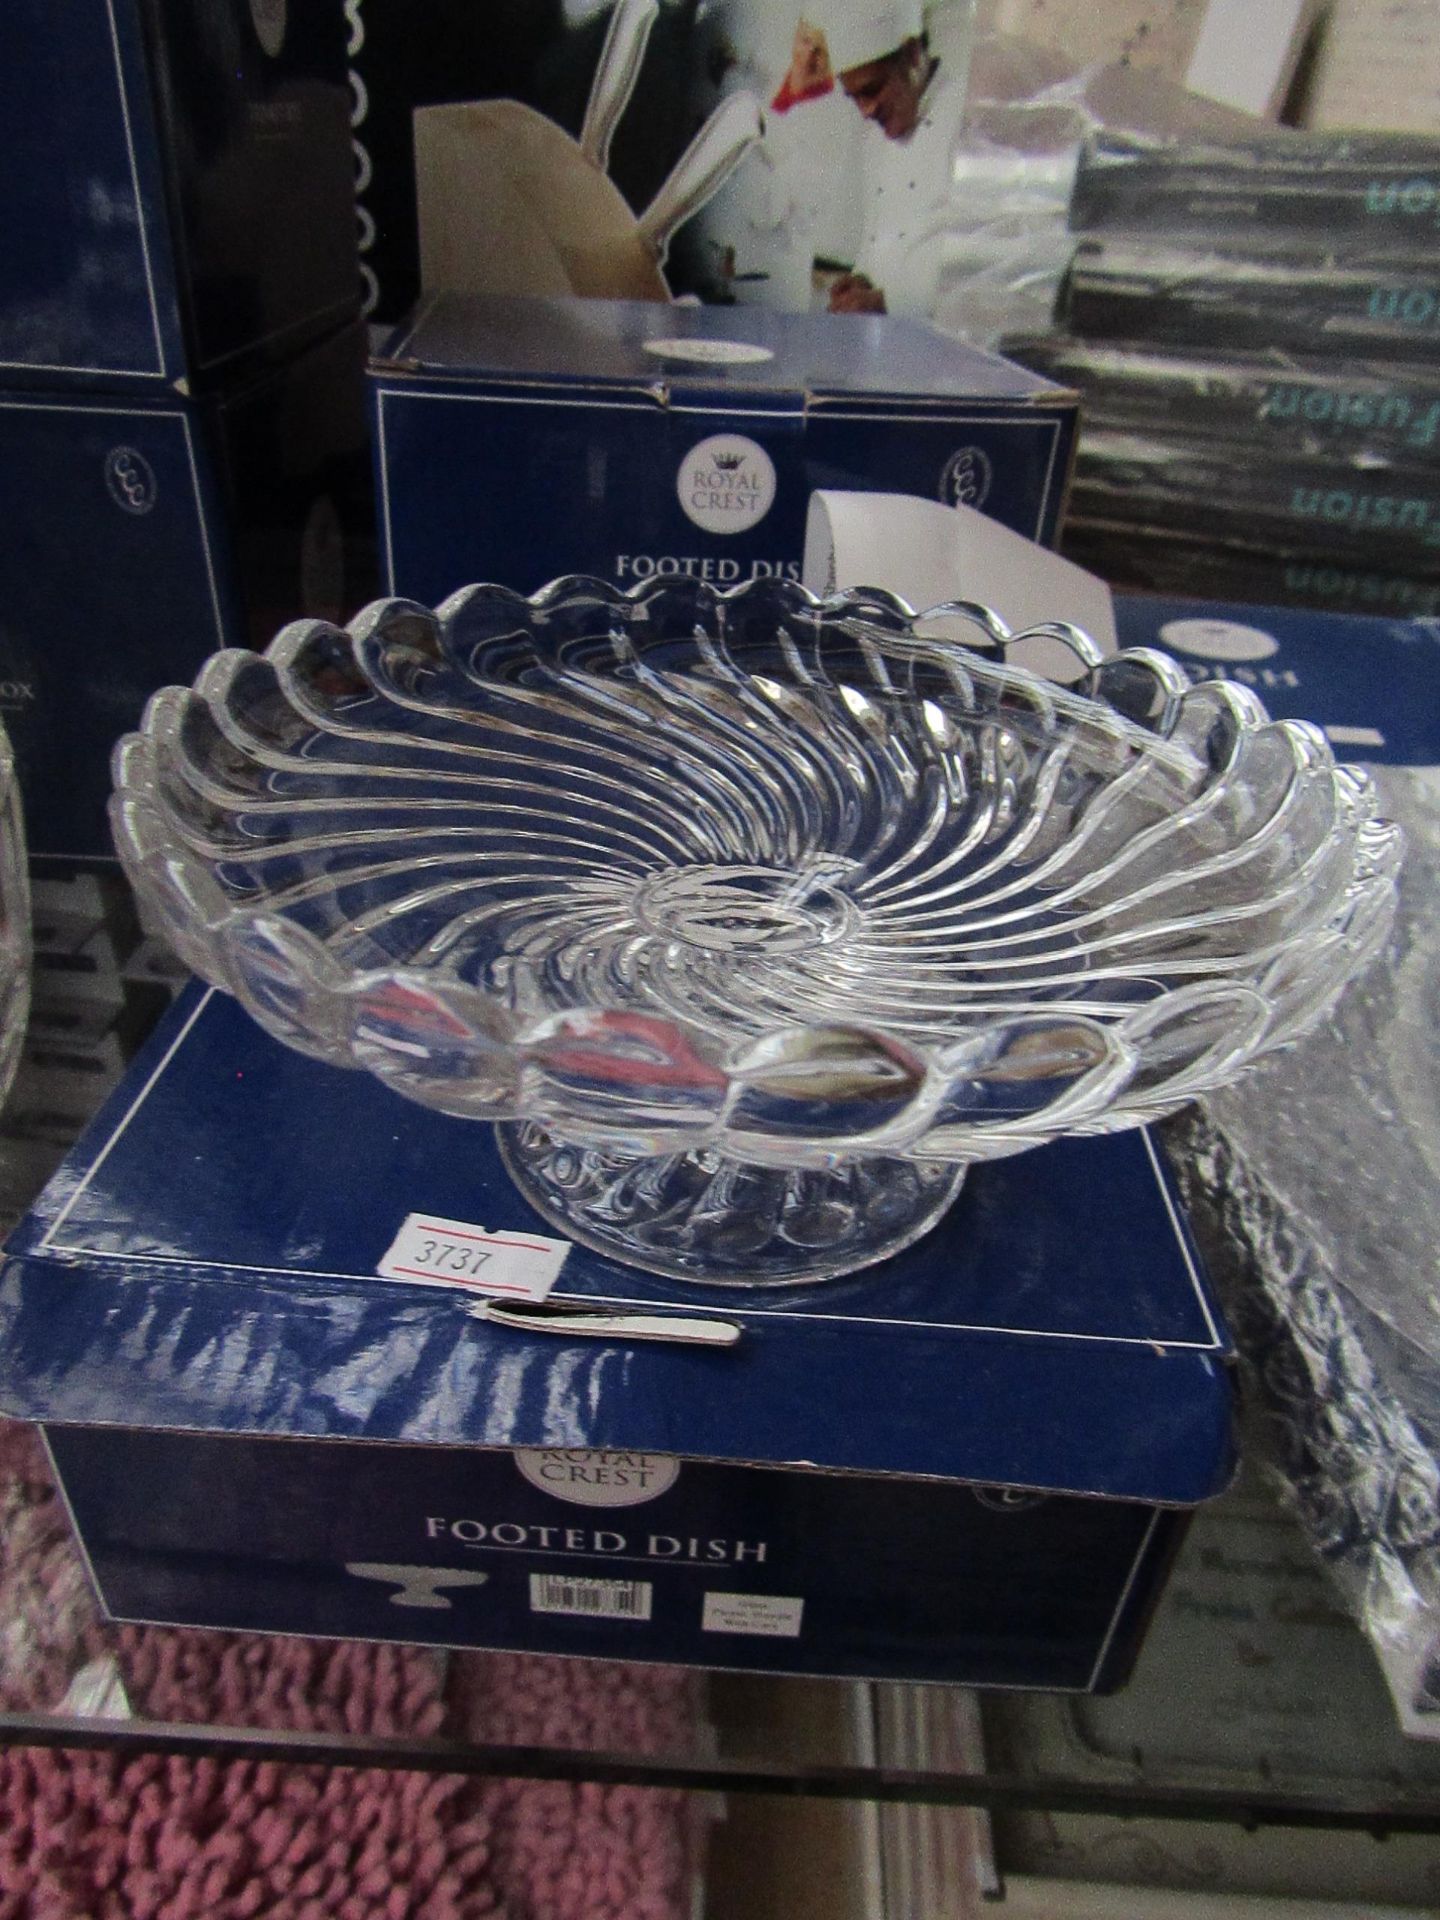 1 x Royal Crest Crystal Footed Dish 5" in Diameter new & packaged - Image 2 of 2